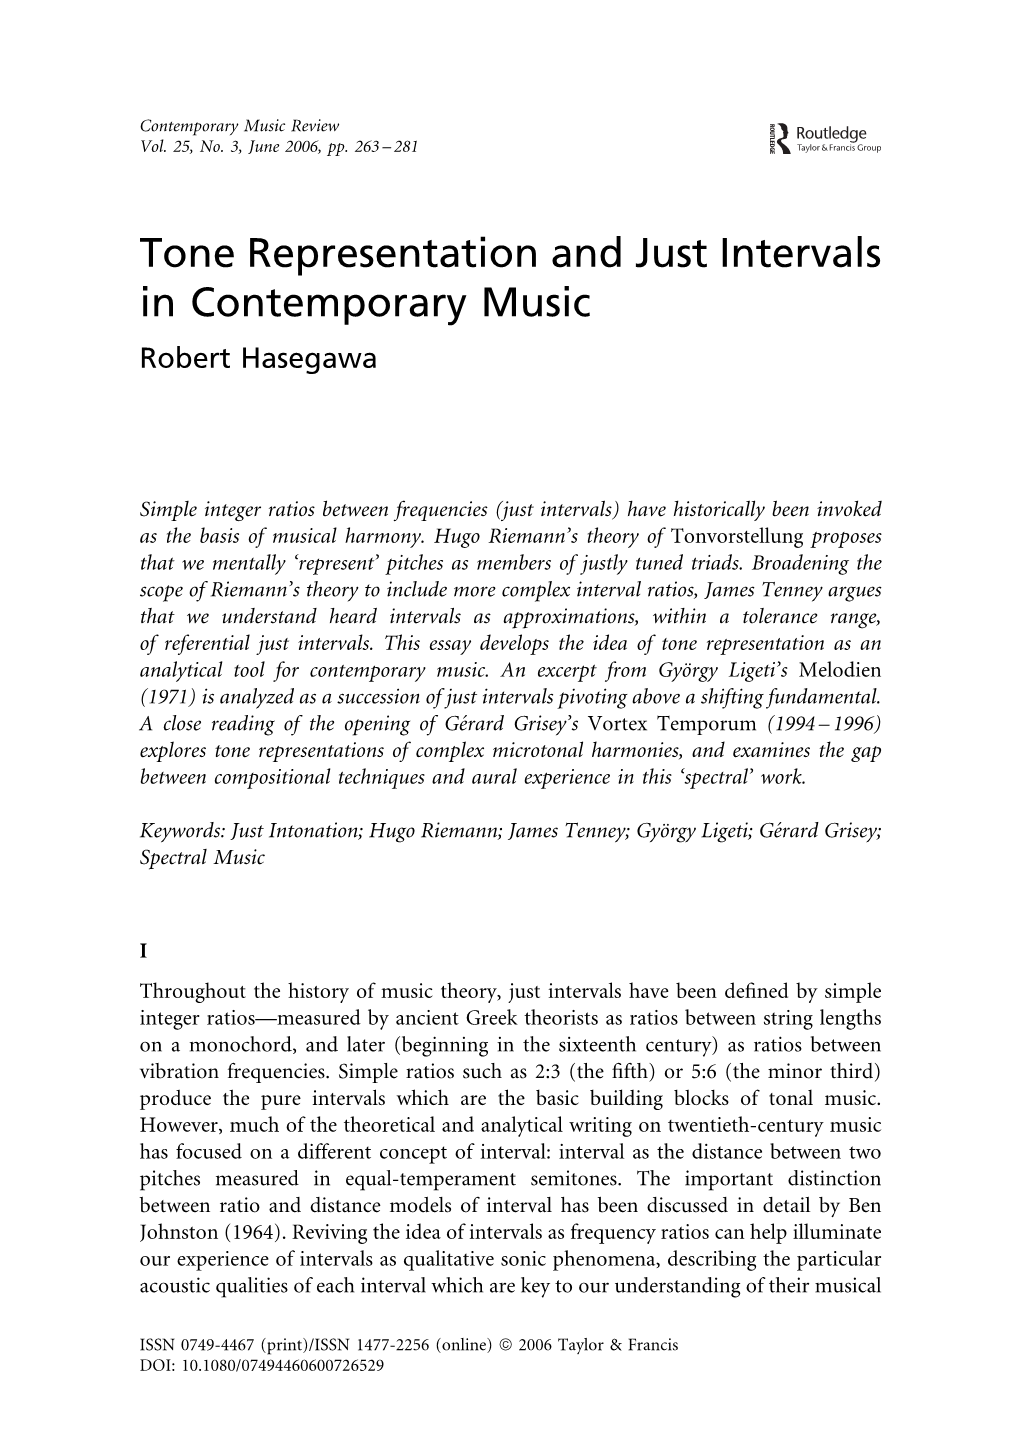 Tone Representation and Just Intervals in Contemporary Music Robert Hasegawa